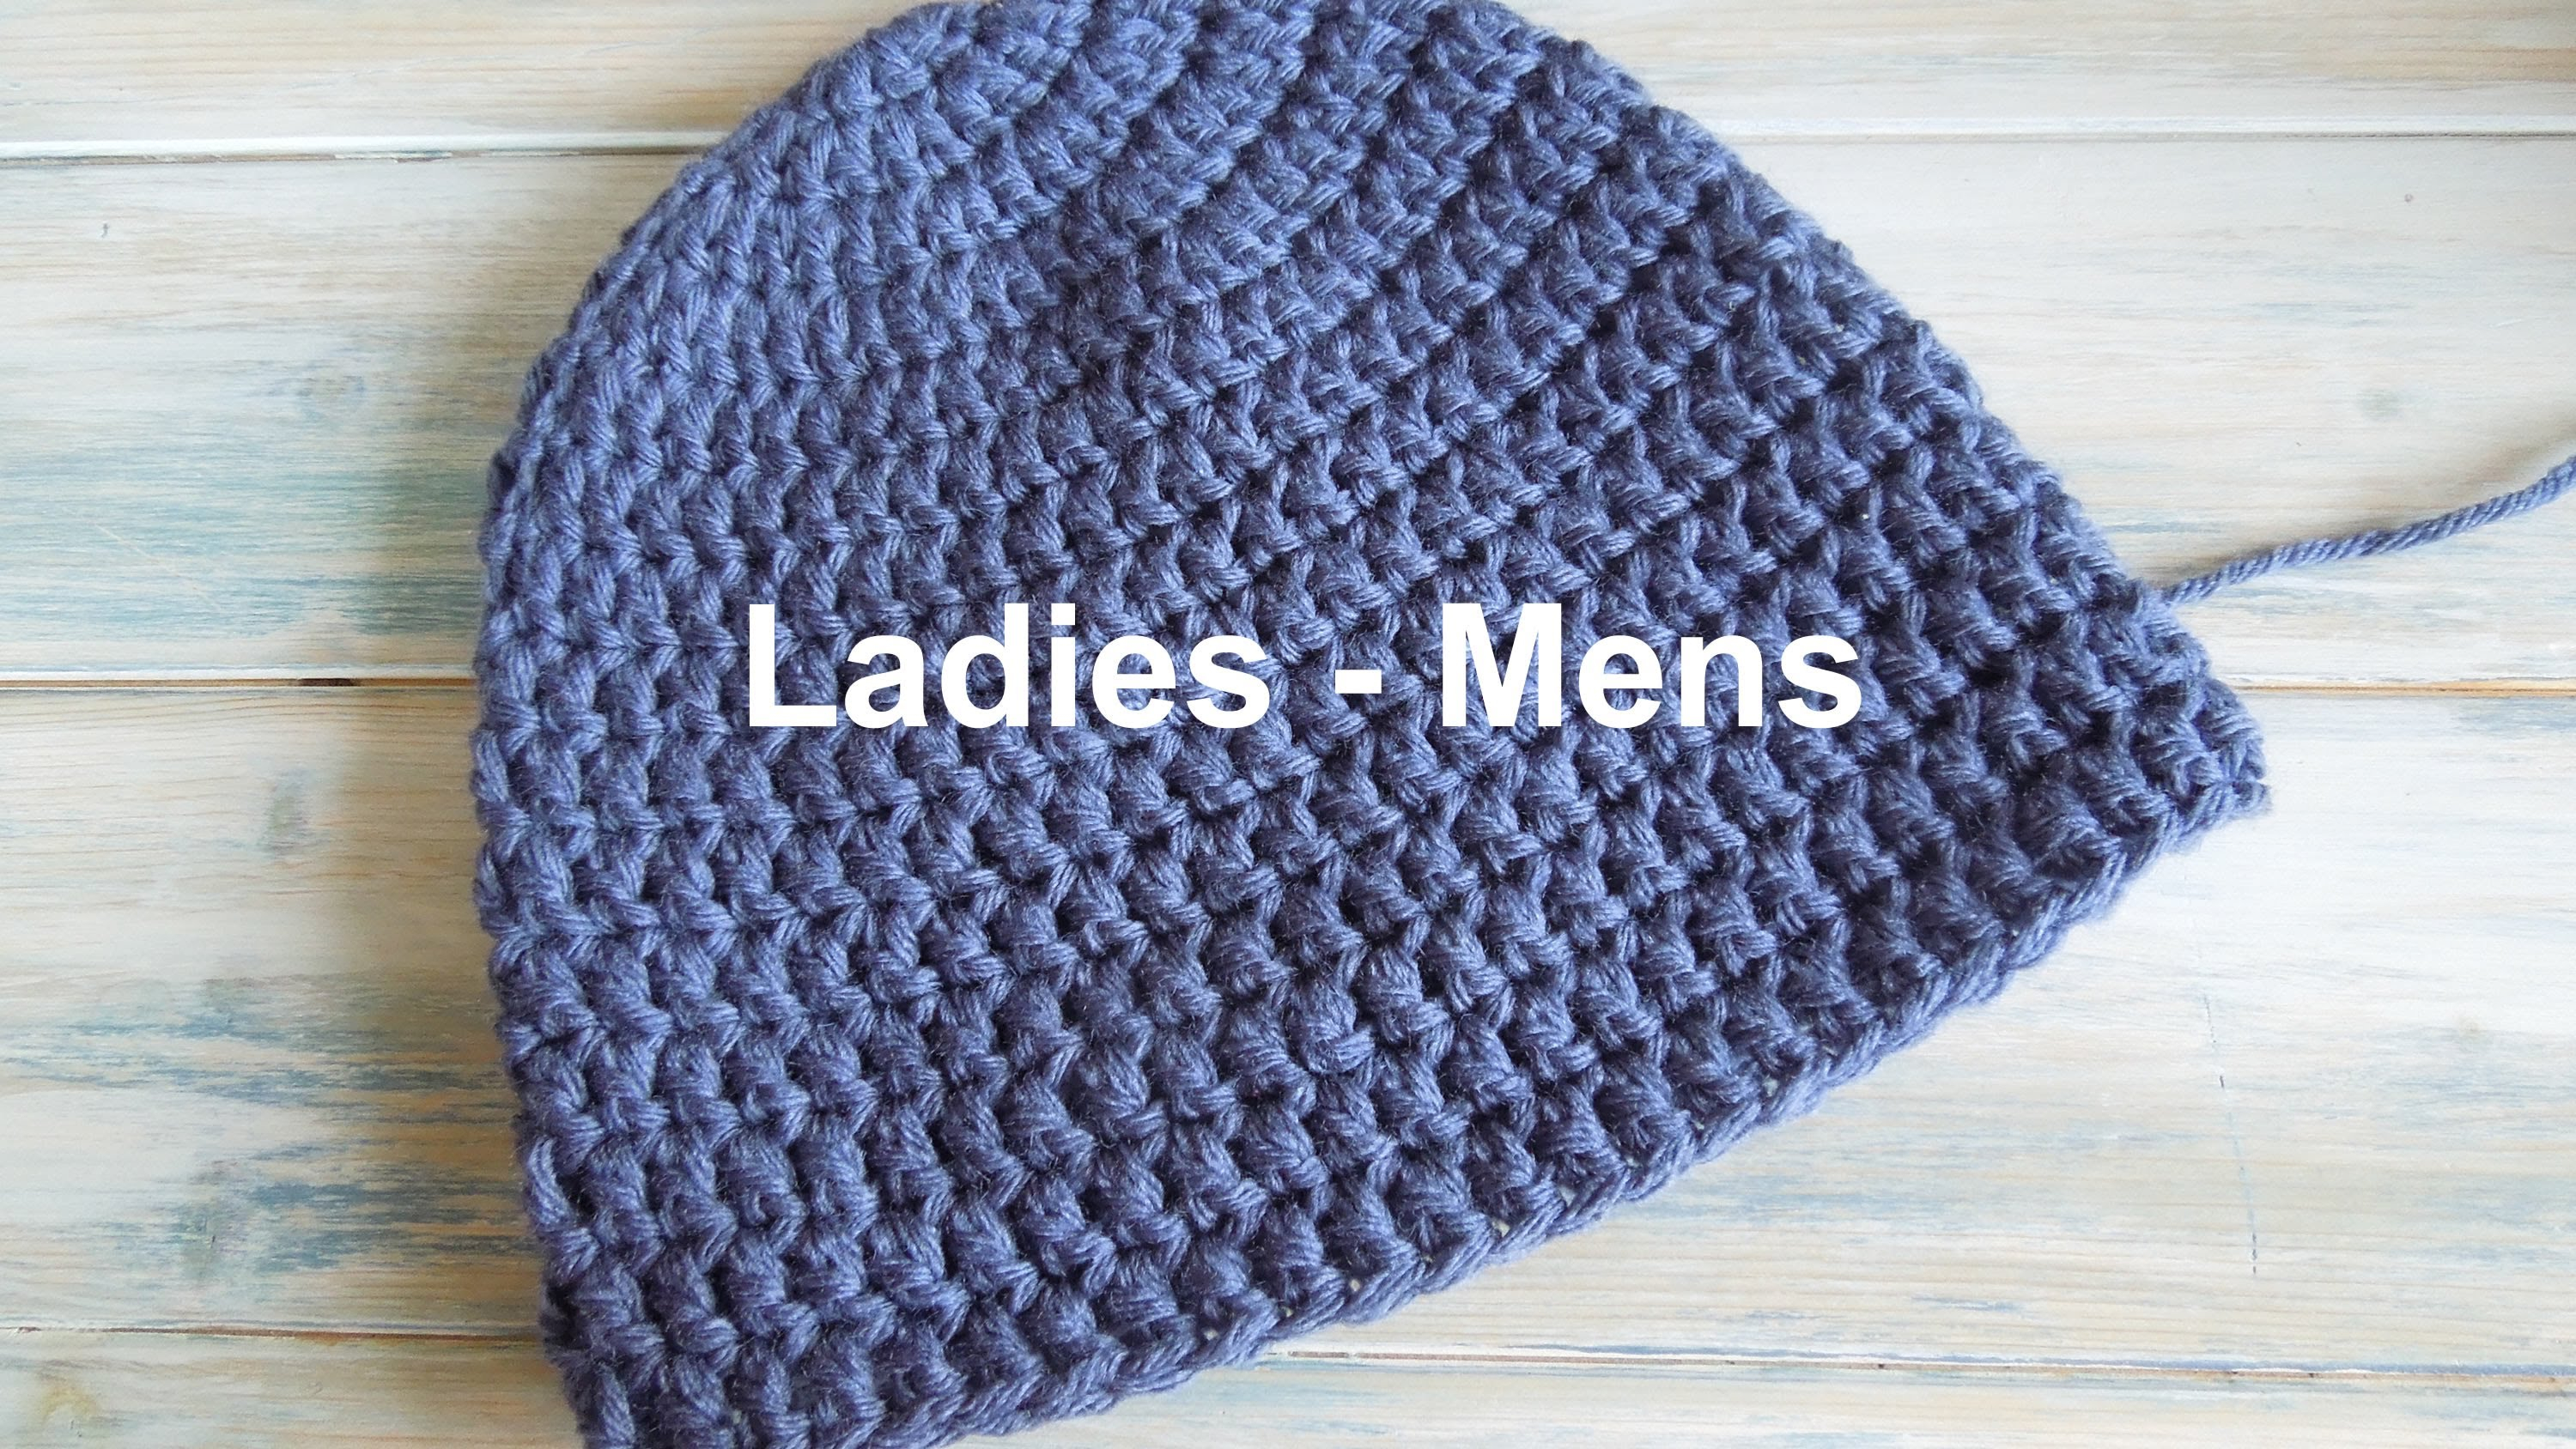 Begginer Crochet Projects Easy Patterns Crochet How To Crochet A Simple Beanie For Ladies Mens Size 22